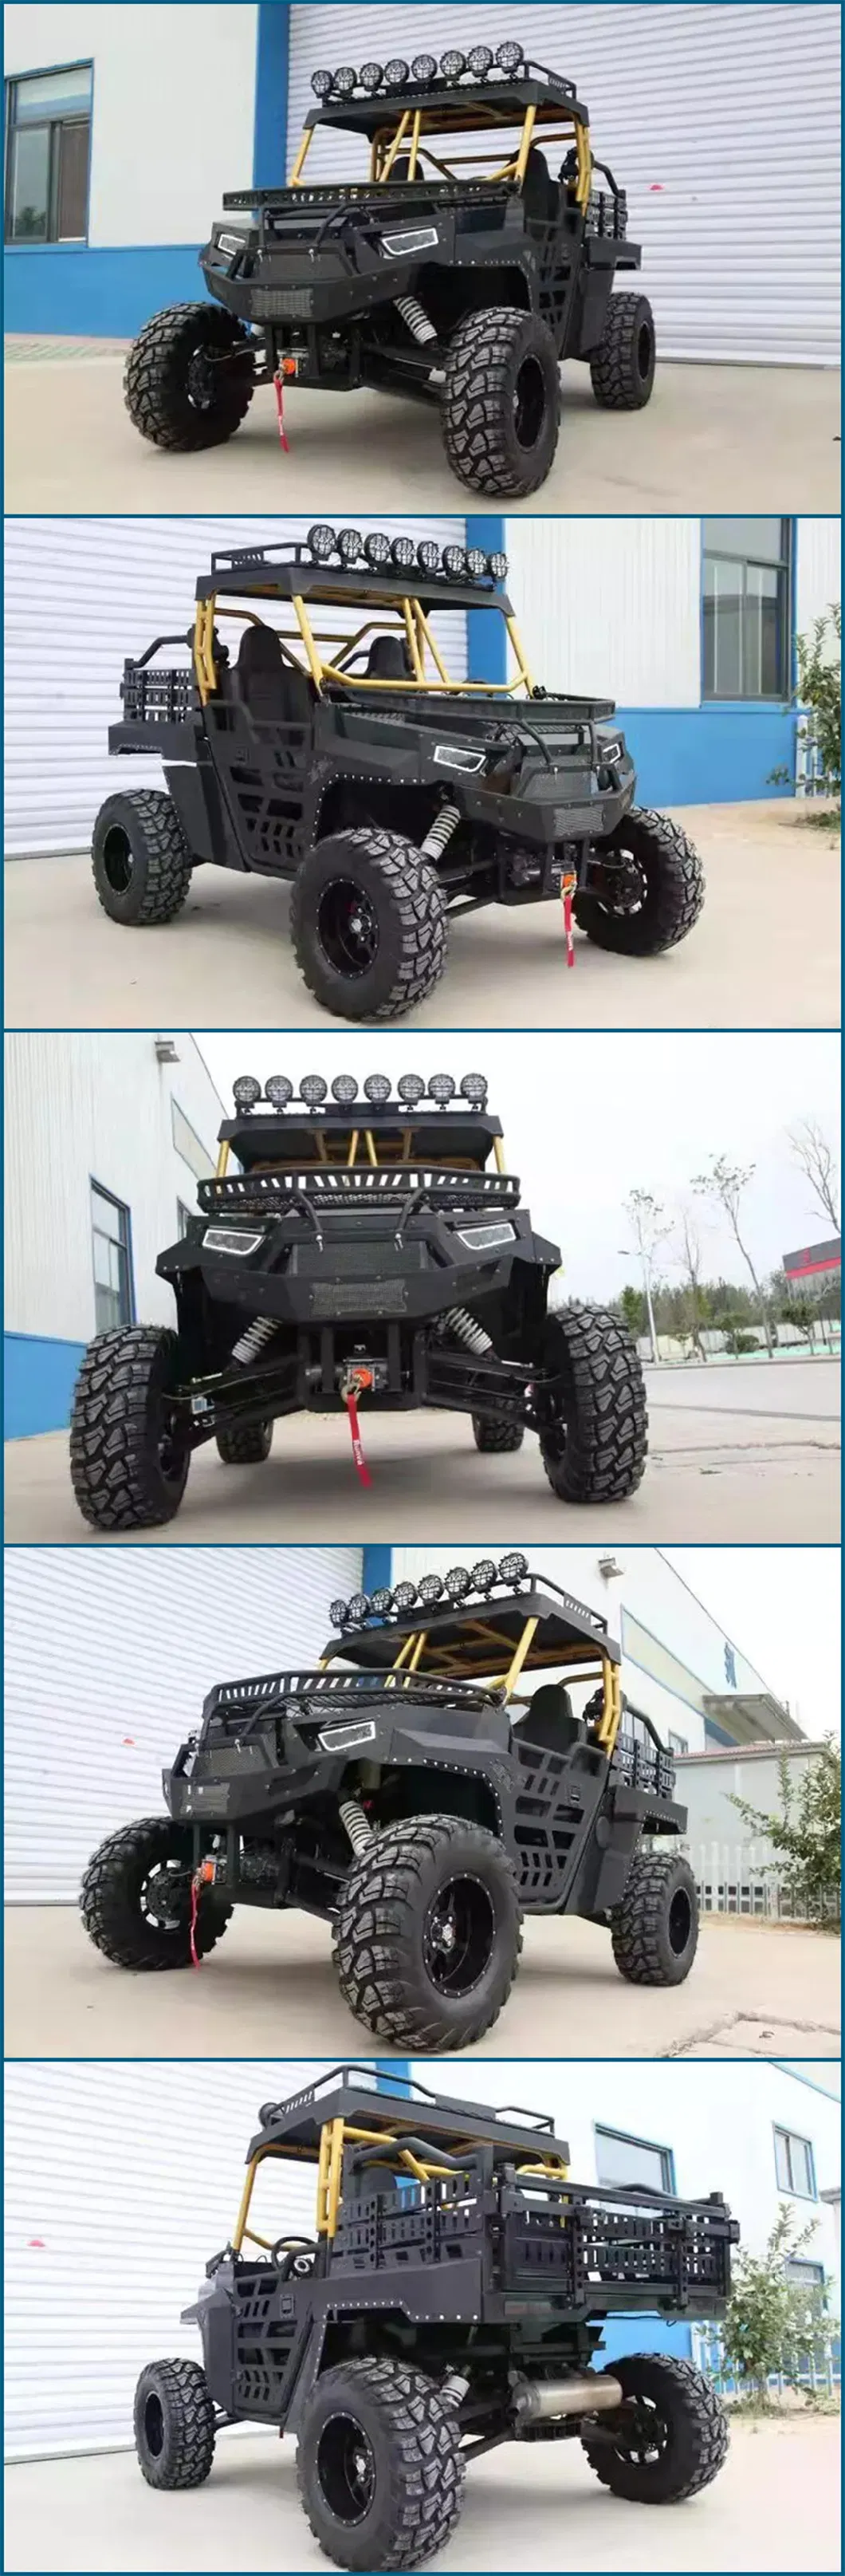 Hot Selling 800cc Adult 2WD-4WD Four-Wheel Two-Seater All-Terrain off-Road Motorcycle Dirt Bike Dune Buggy Quad Bike ATV/UTV